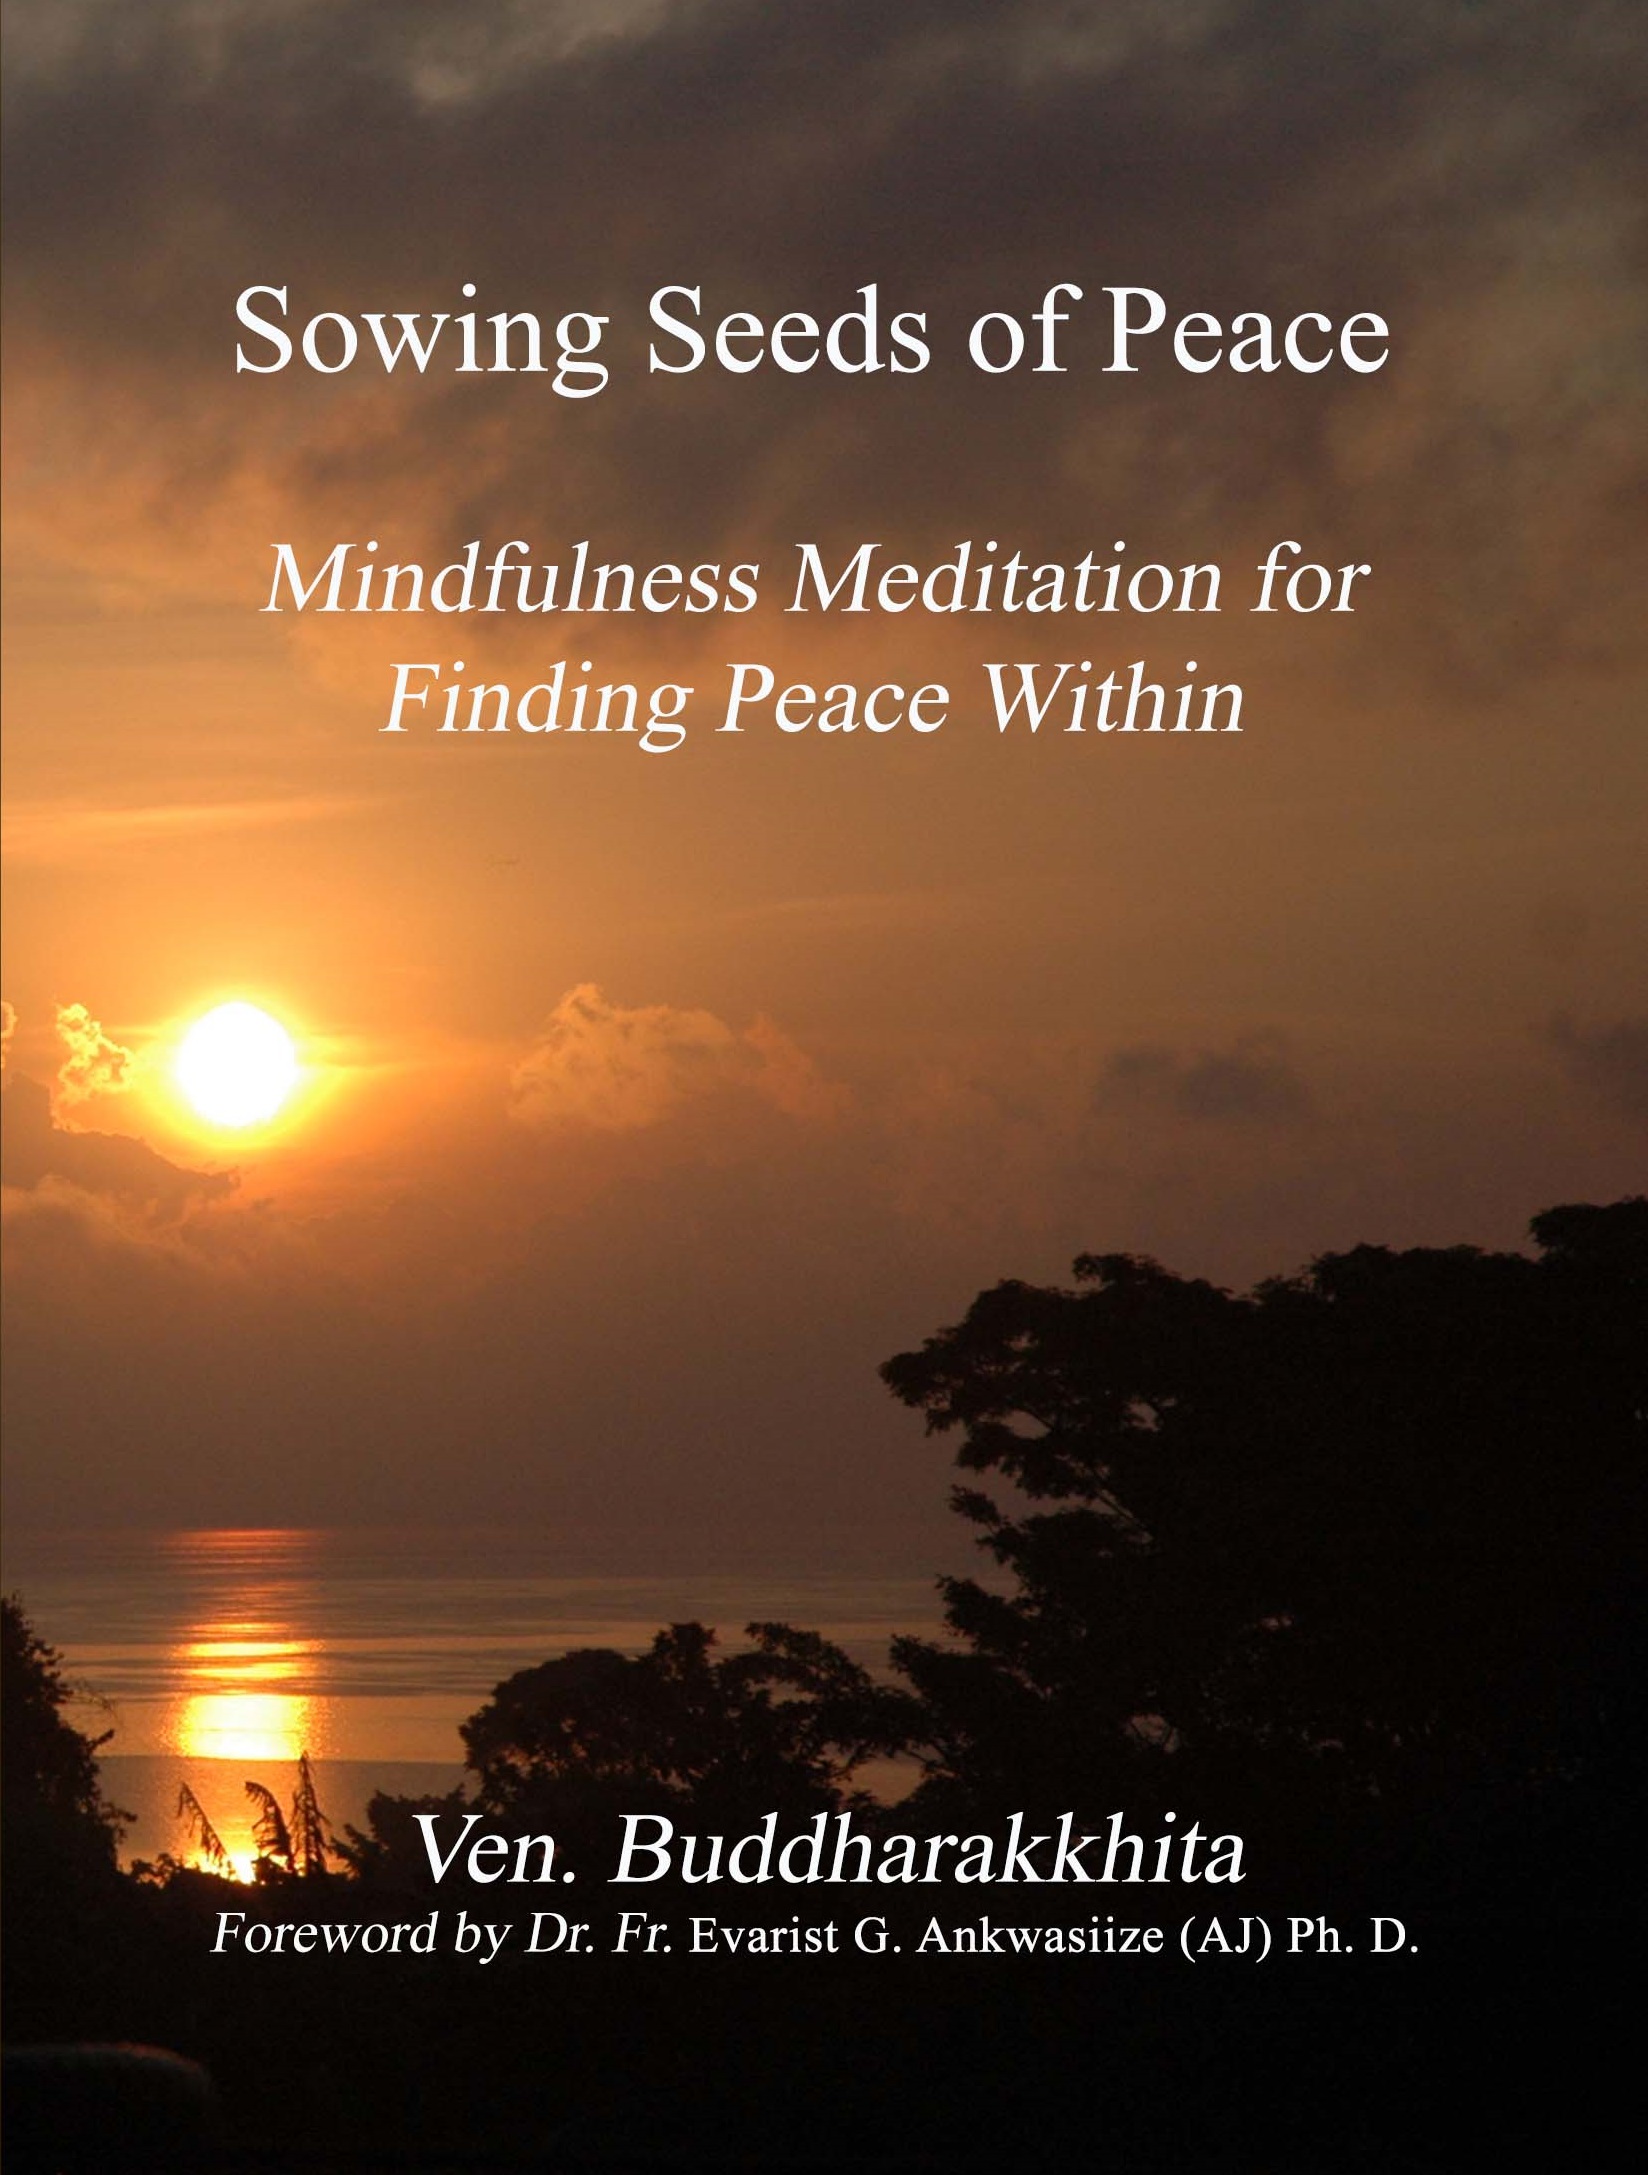 Sowing Seeds of Peace: Mindfulness Meditation for Finding Peace Within